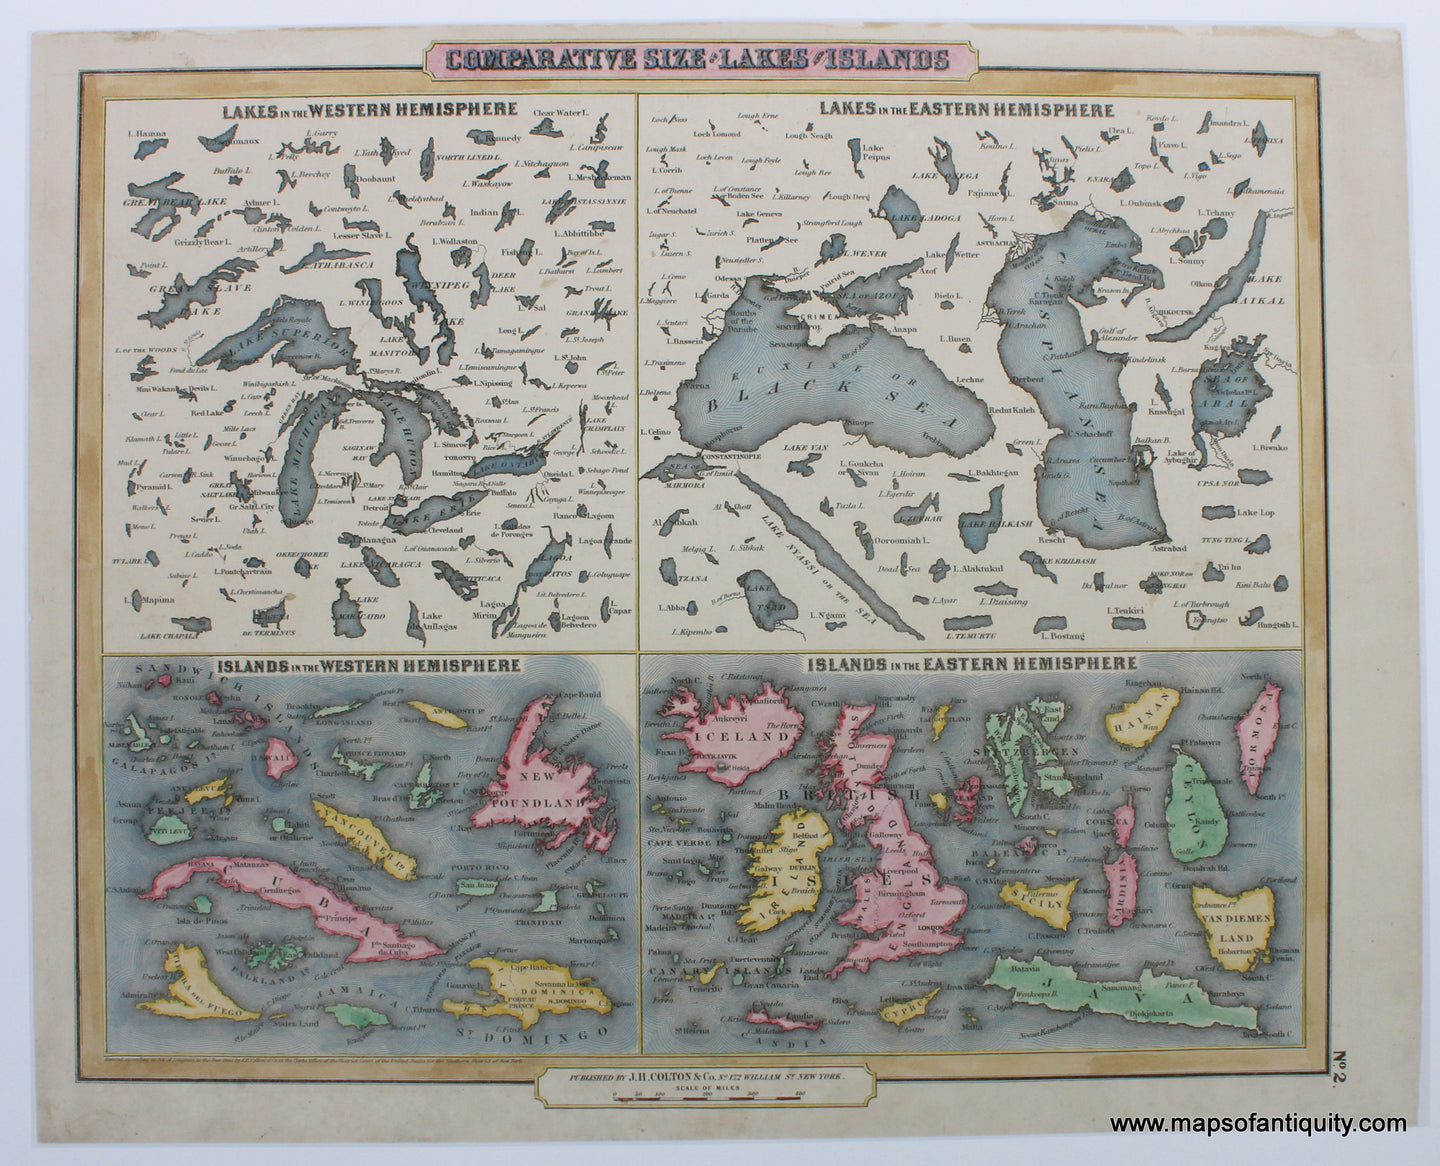 Reproduction-Comparative-Size-of-Lakes-and-Islands---Reproduction-Reproductions--1855-Reproduction-Maps-Of-Antiquity